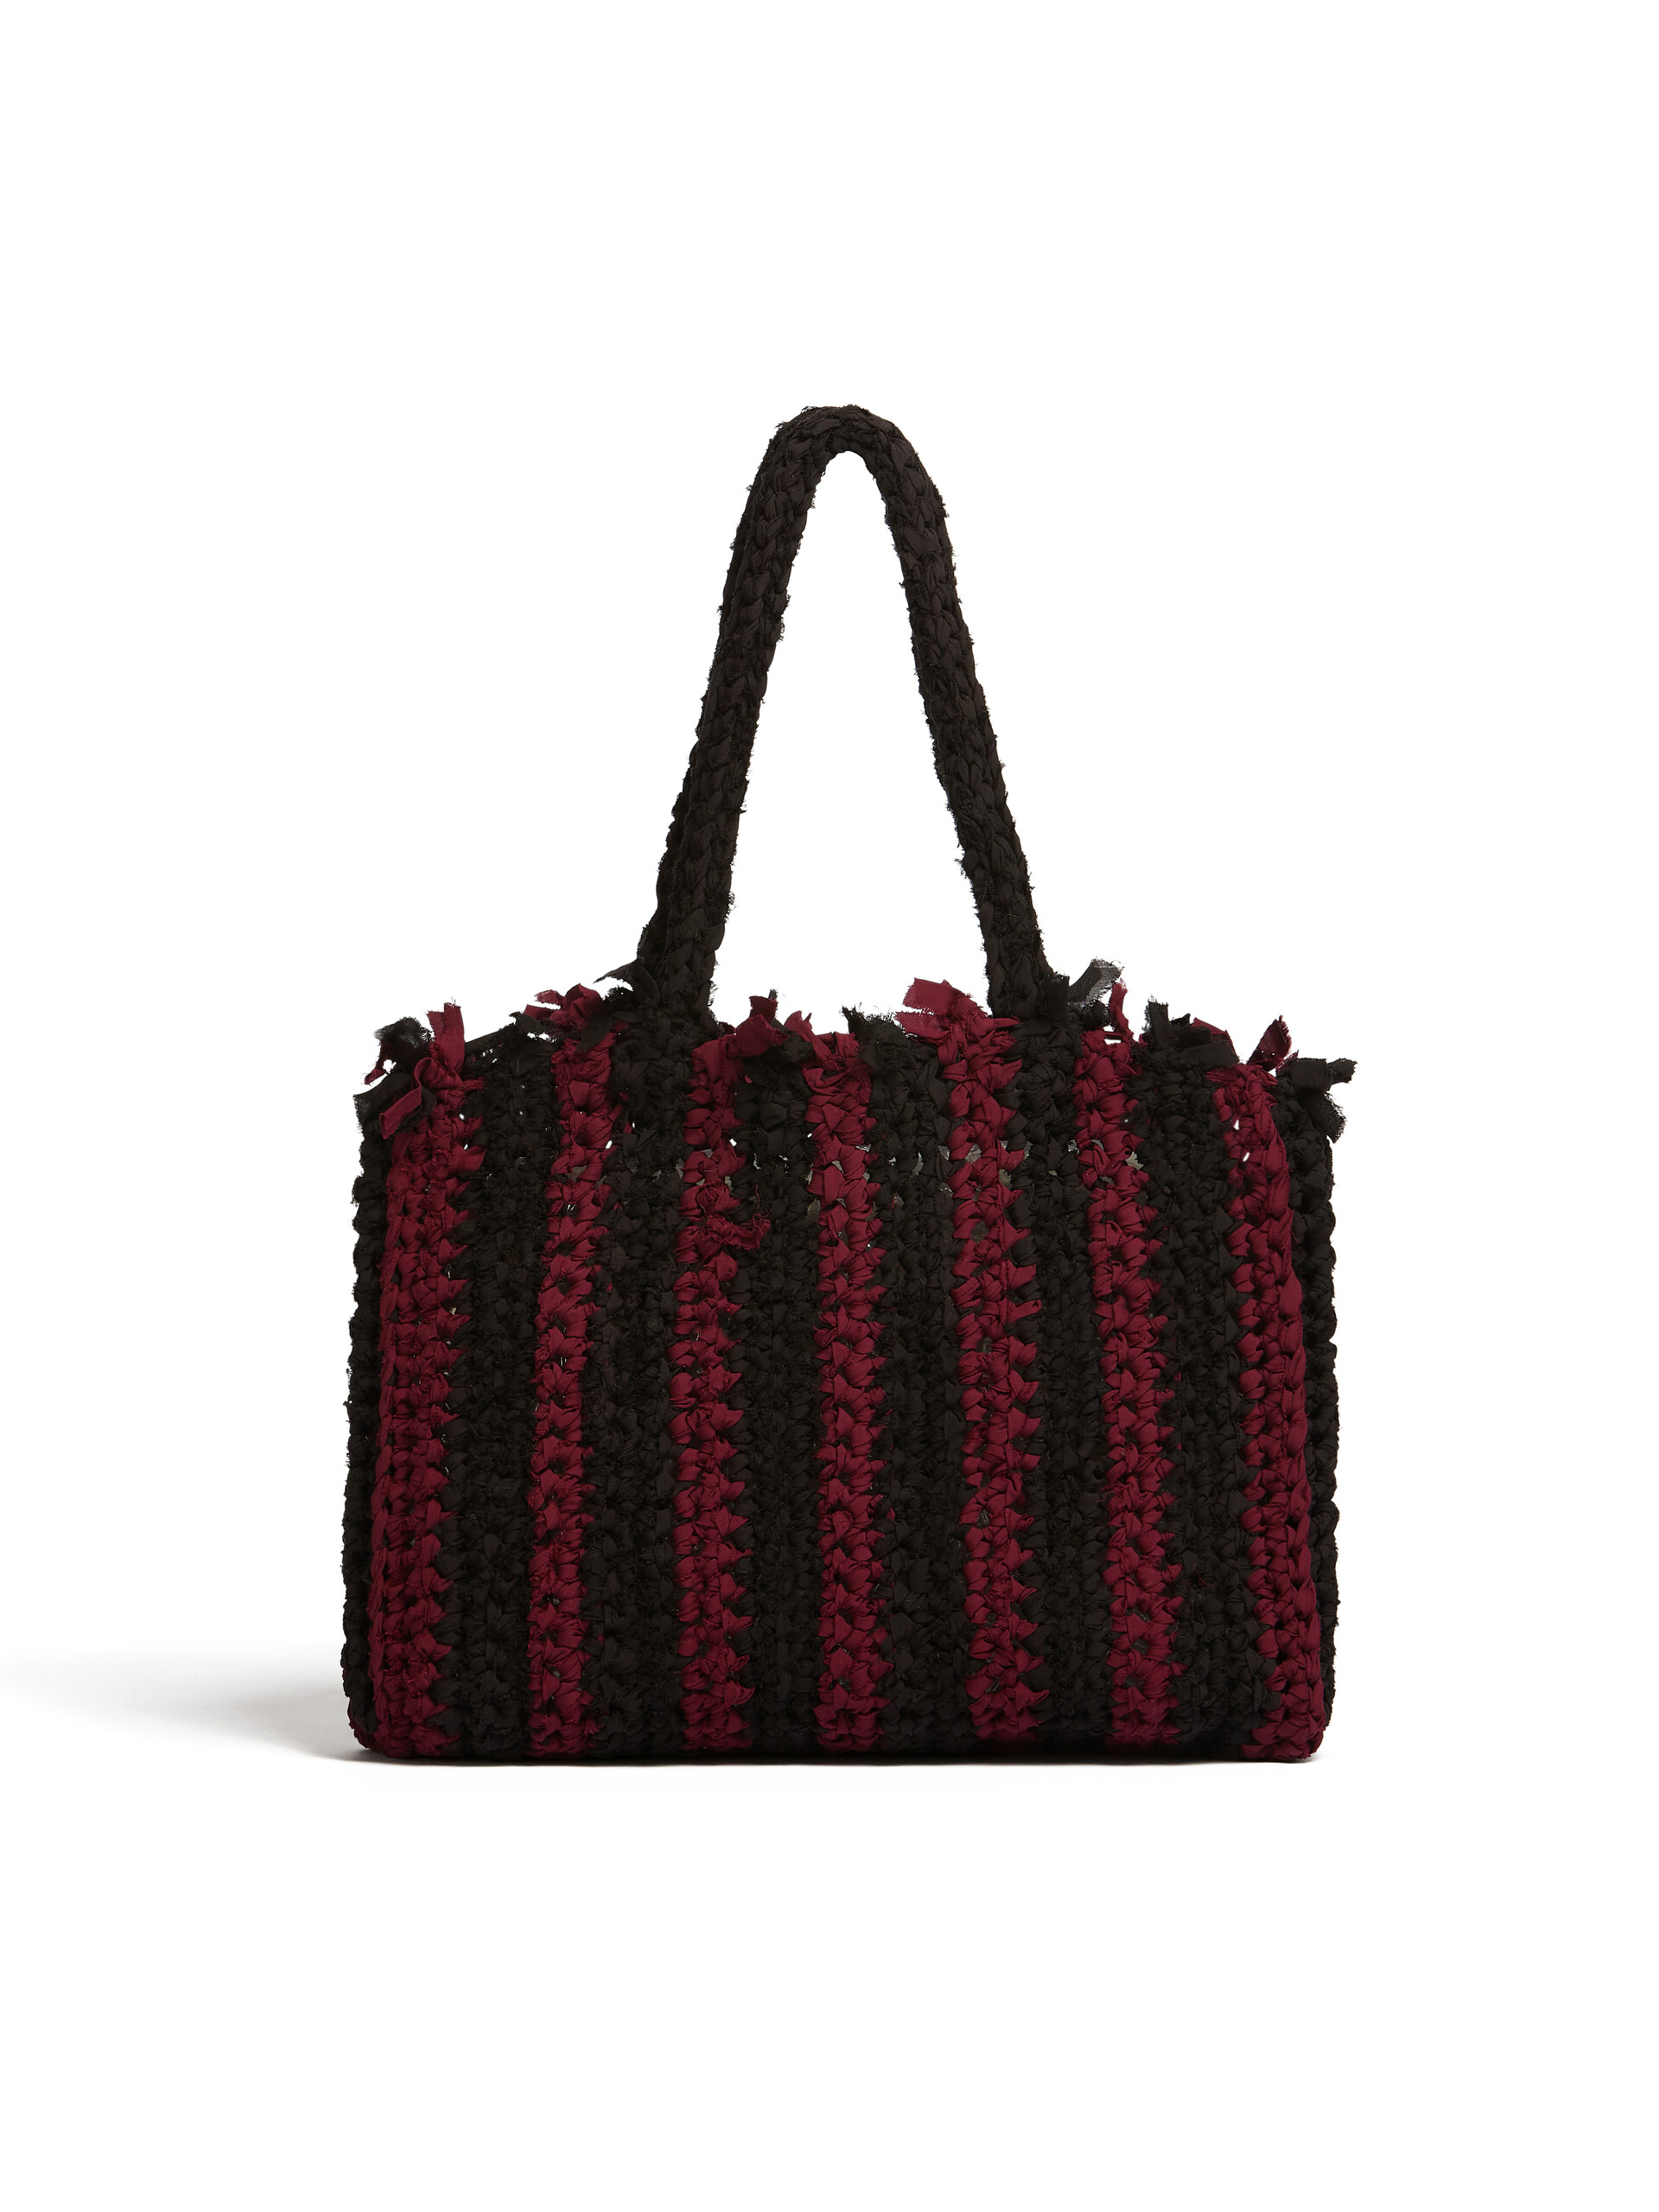 MARNI MARKET bag in black and burgundy cotton - Bags - Image 3